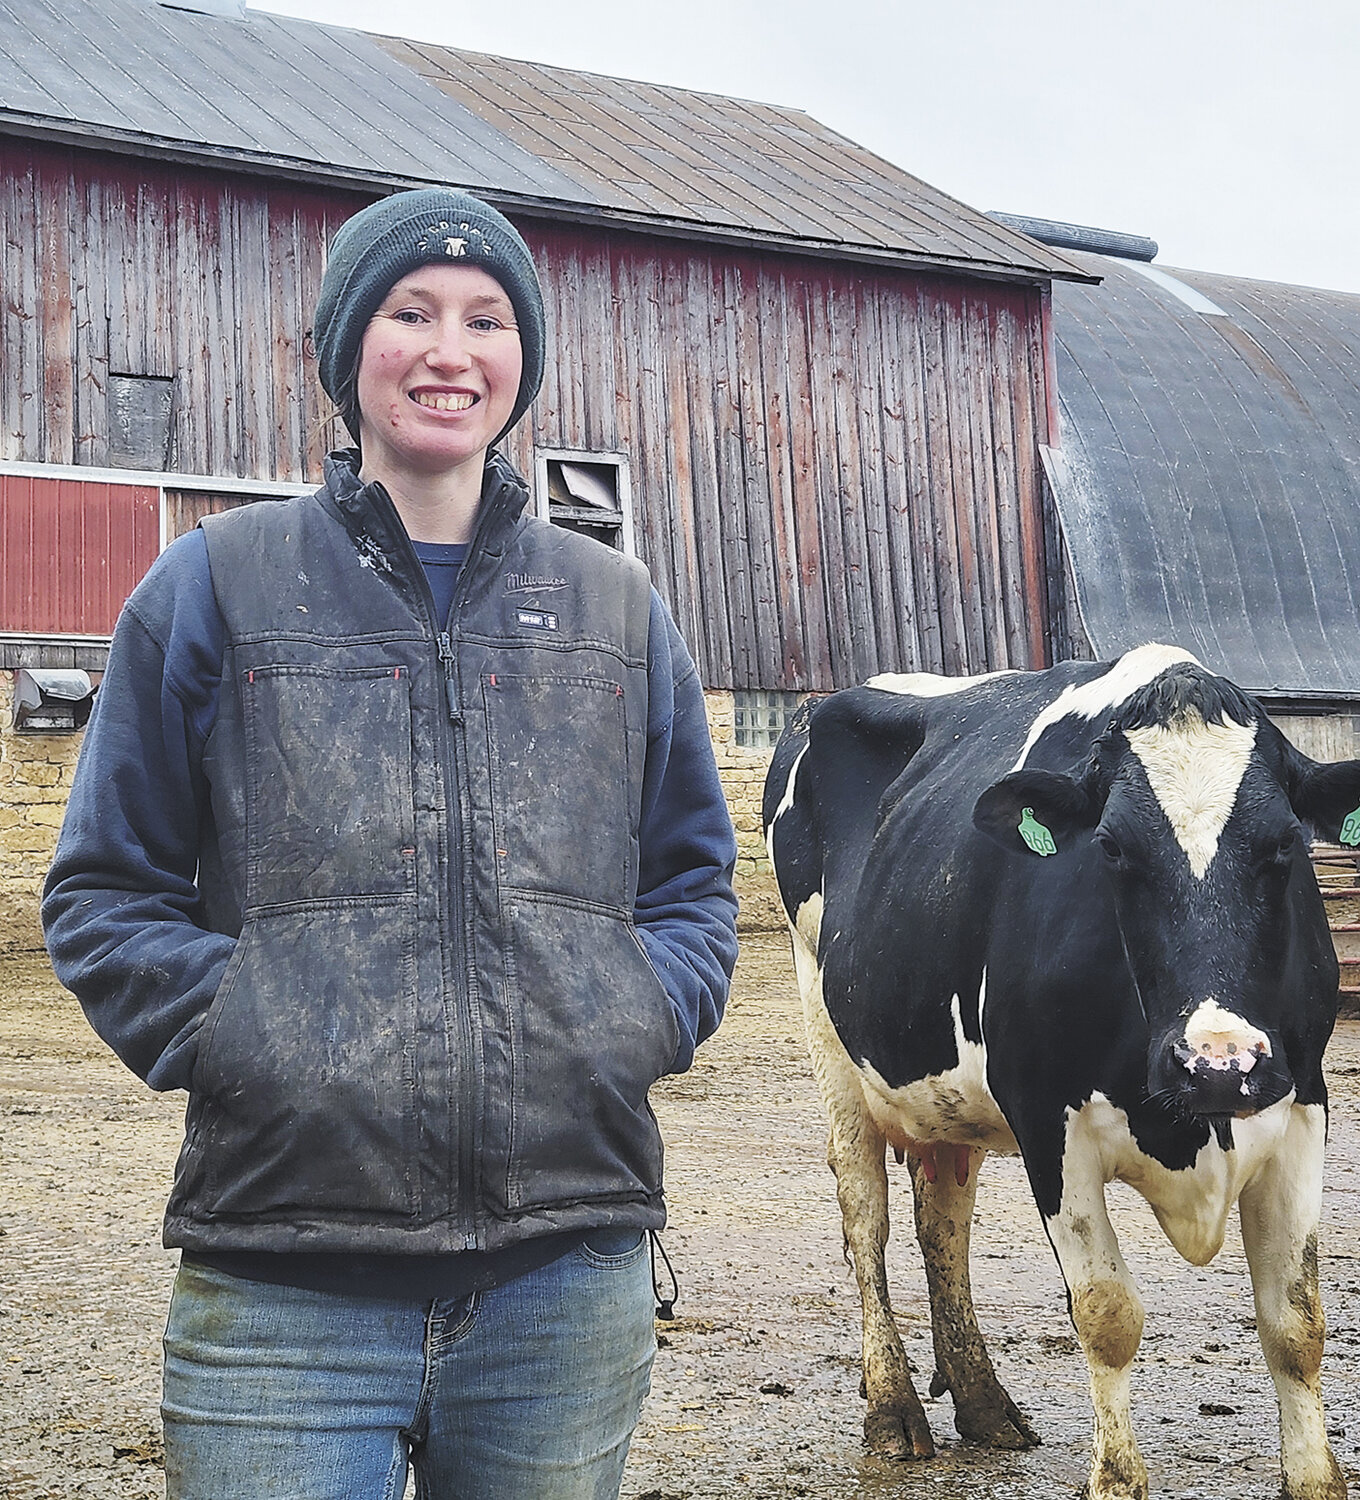 Jennifer Jandt farms with her husband, Joe, and three kids, Gabe, Gibson and Ellison, near West Salem, Wisconsin. They milk 160 cows in a stanchion barn with 13 units. The herd is hosued in a sand-bedded freestall barn.